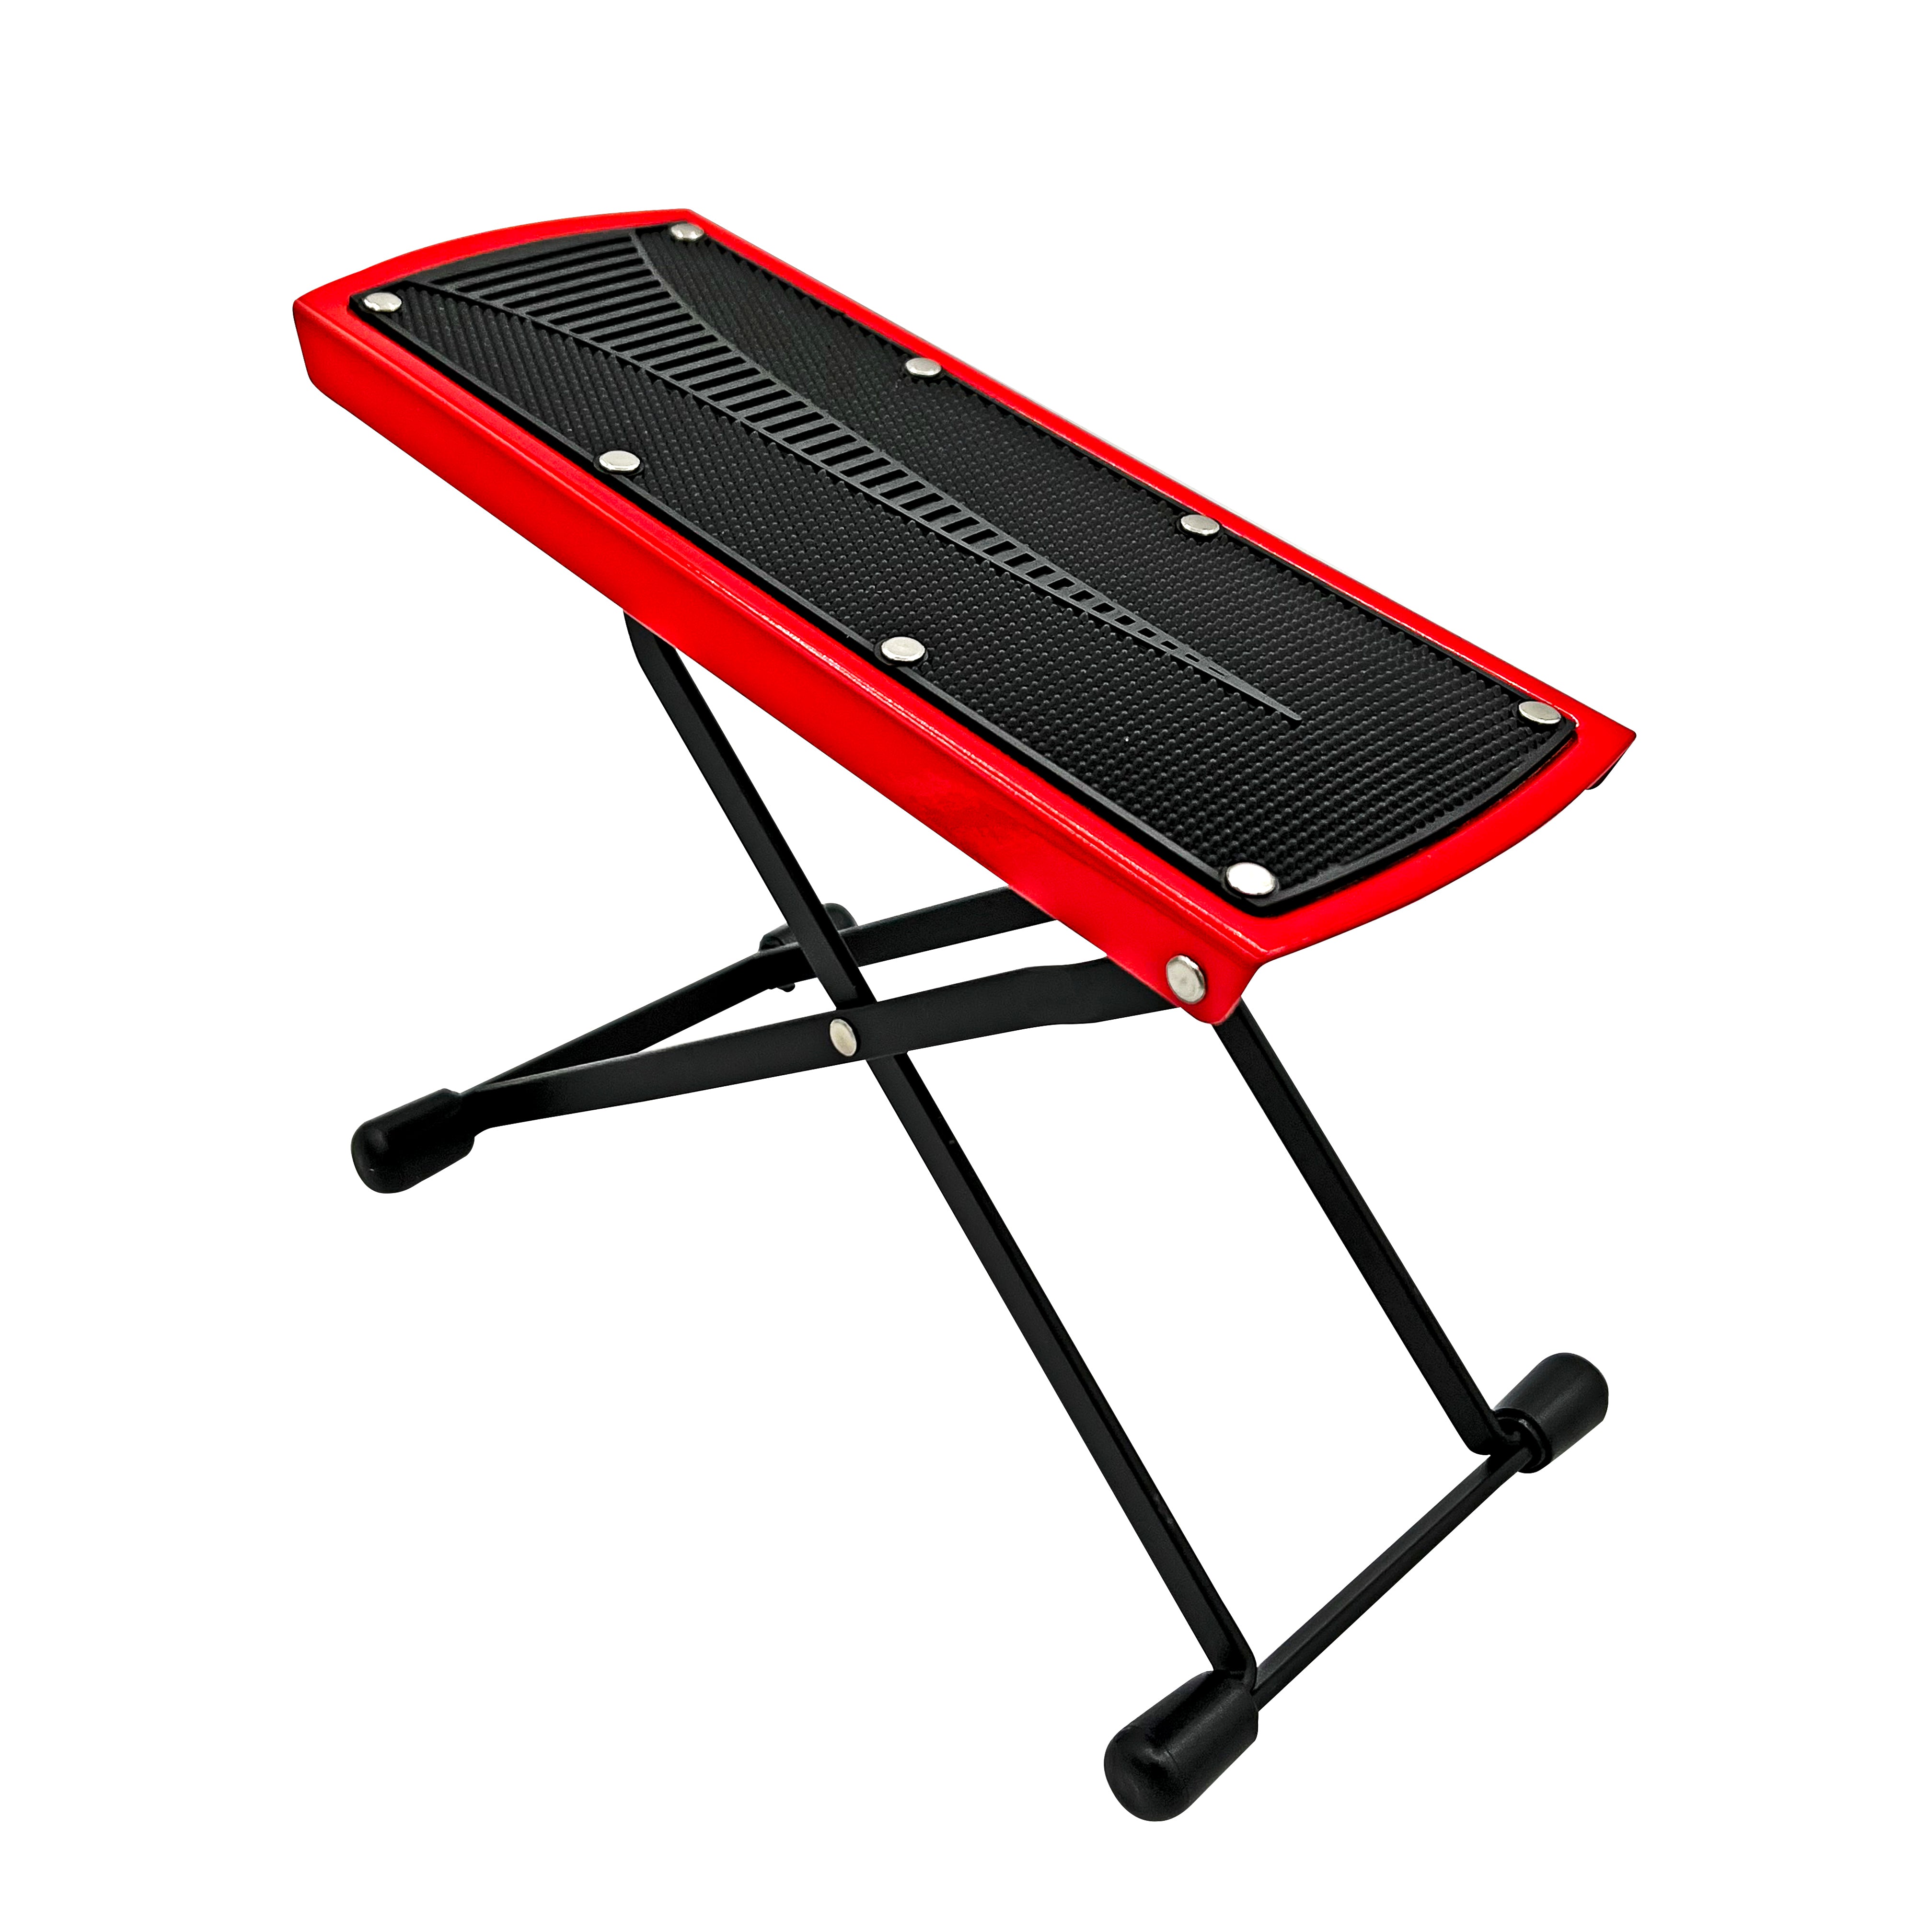 5 Core Red Guitar Foot Stool Stand 6 Level Height Adjustable Leg Rest • Stable Foot Stand w Non-Slip Pad